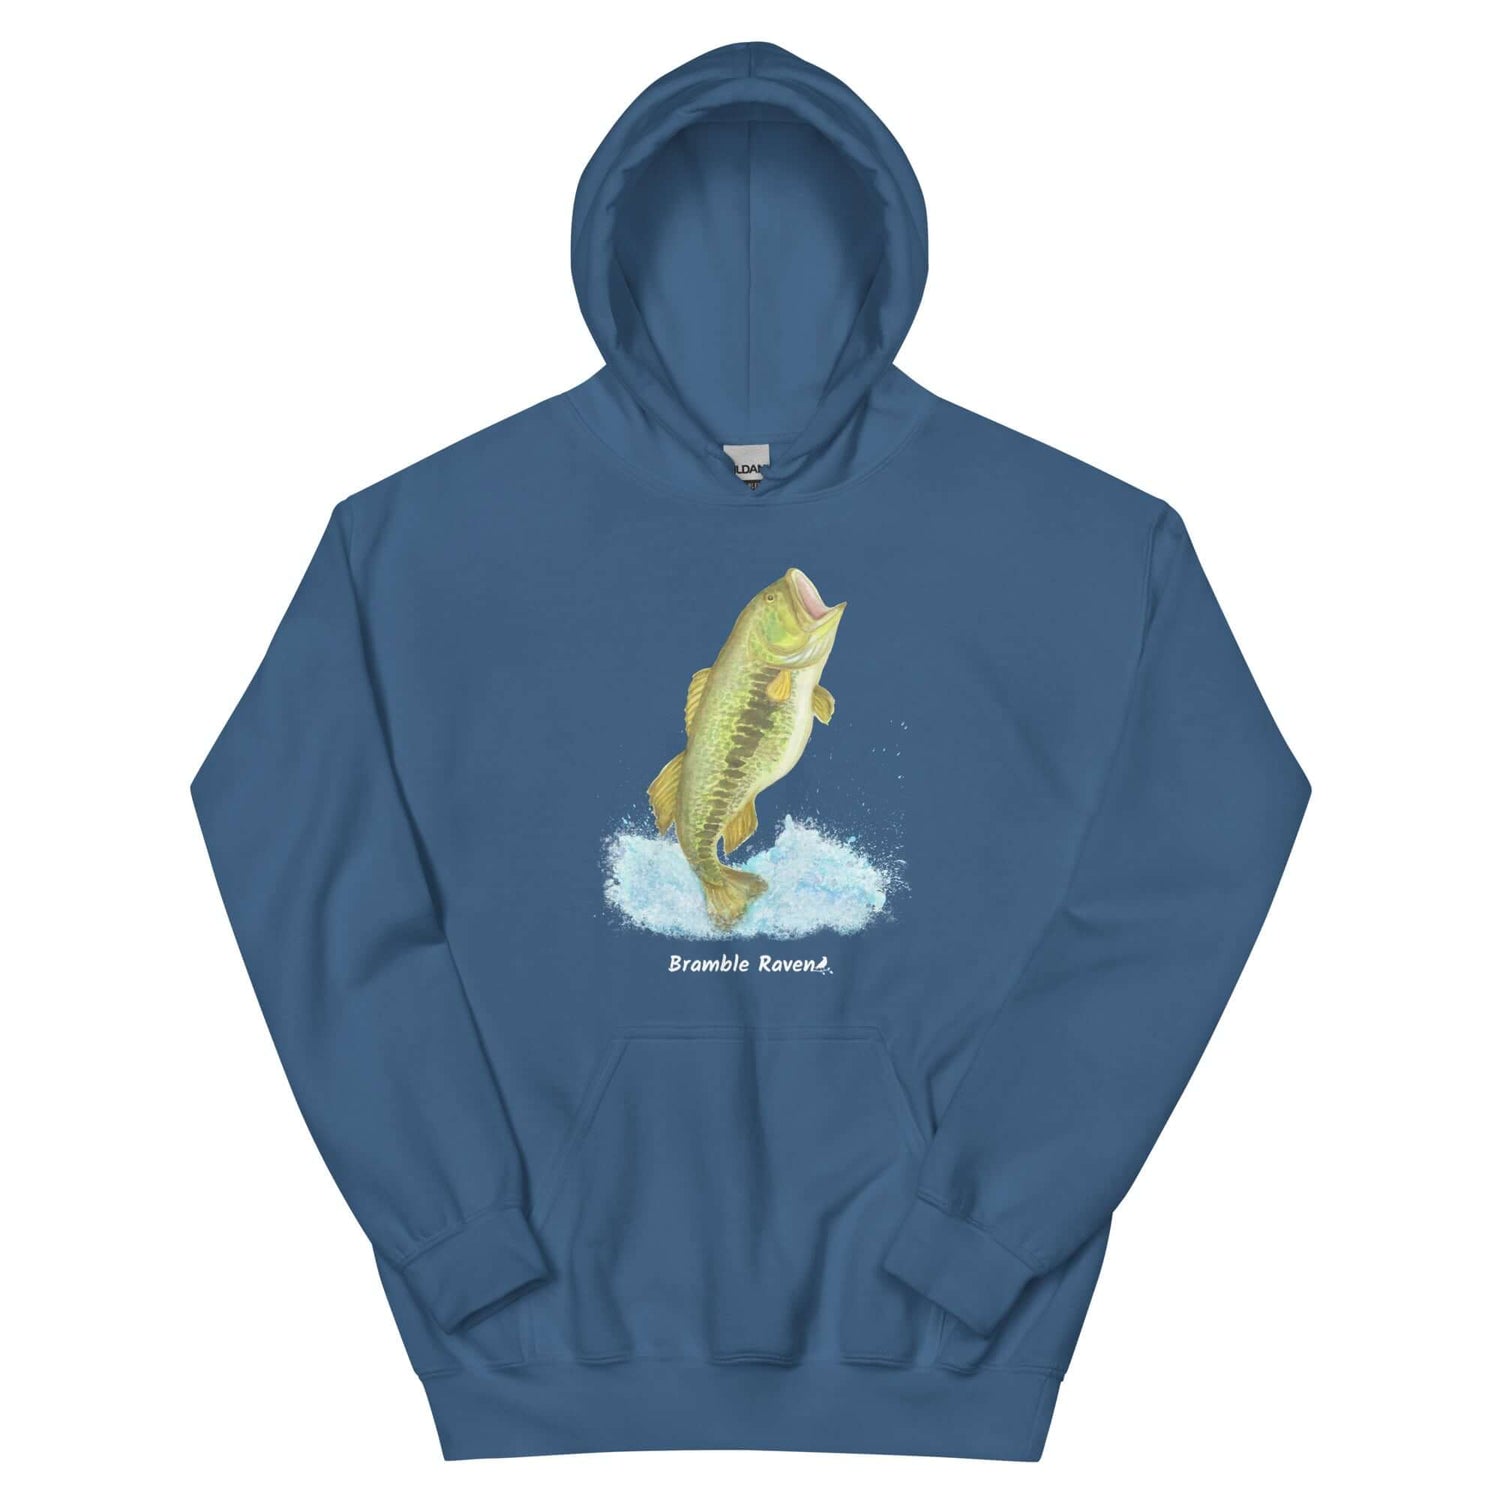 Unisex heavy blend indigo blue colored hoodie. Features original watercolor painting of a largemouth bass leaping from the water on the front.